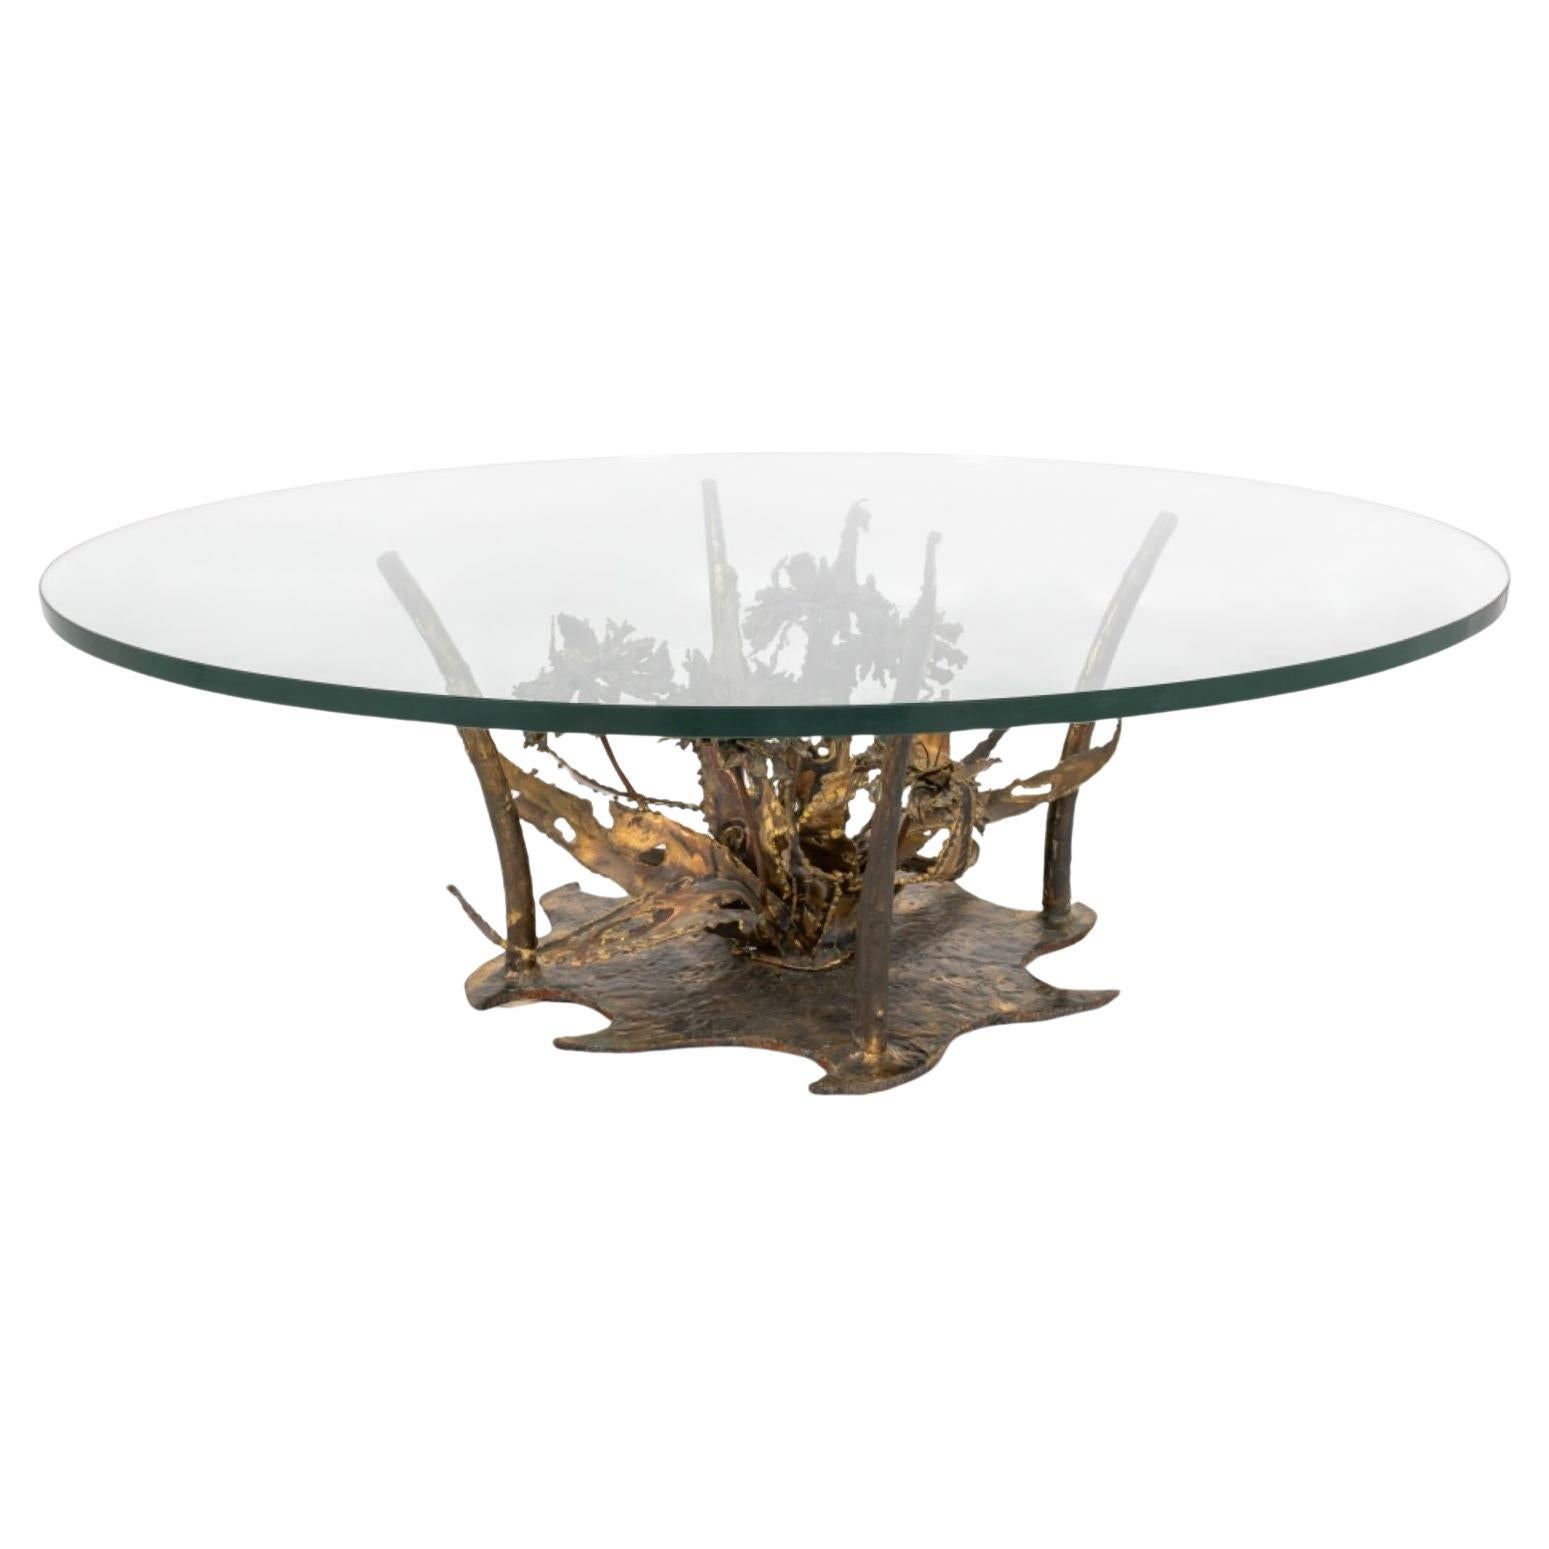 Silas Seandel Bronze and Glass Low Table, 1970s For Sale